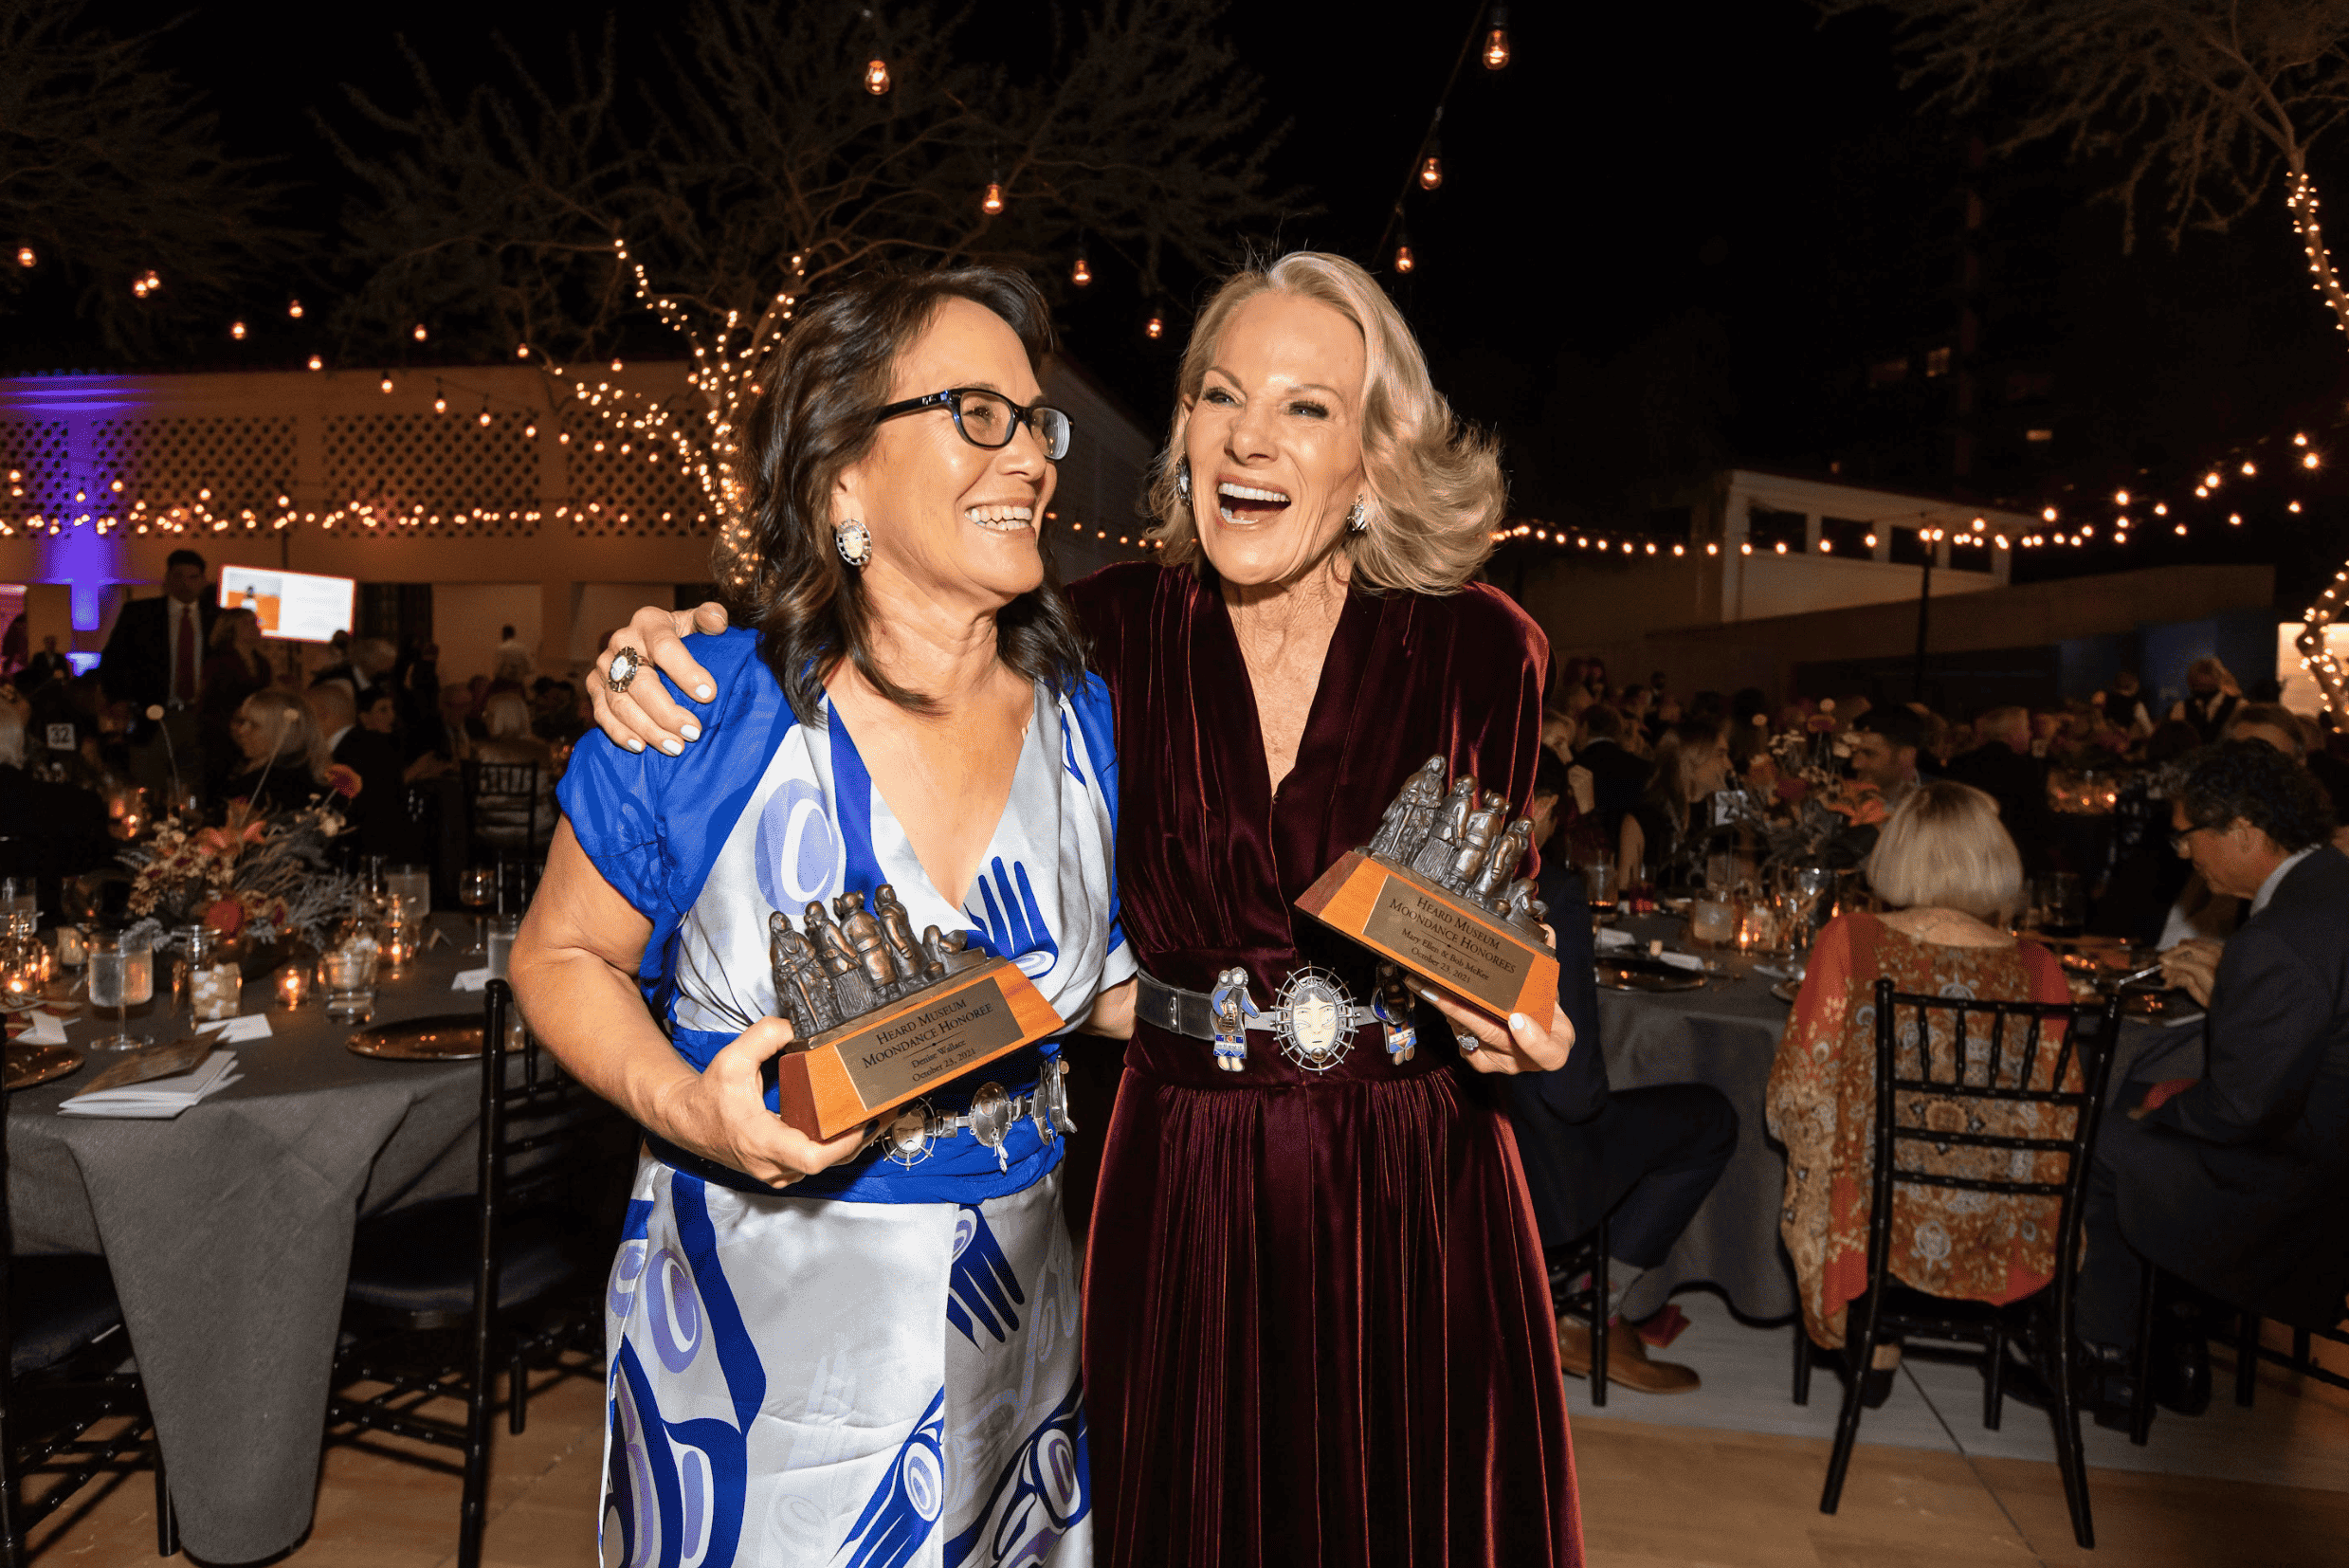 Two women smiling and holding awards at an evening moondance event with string lights in the background.